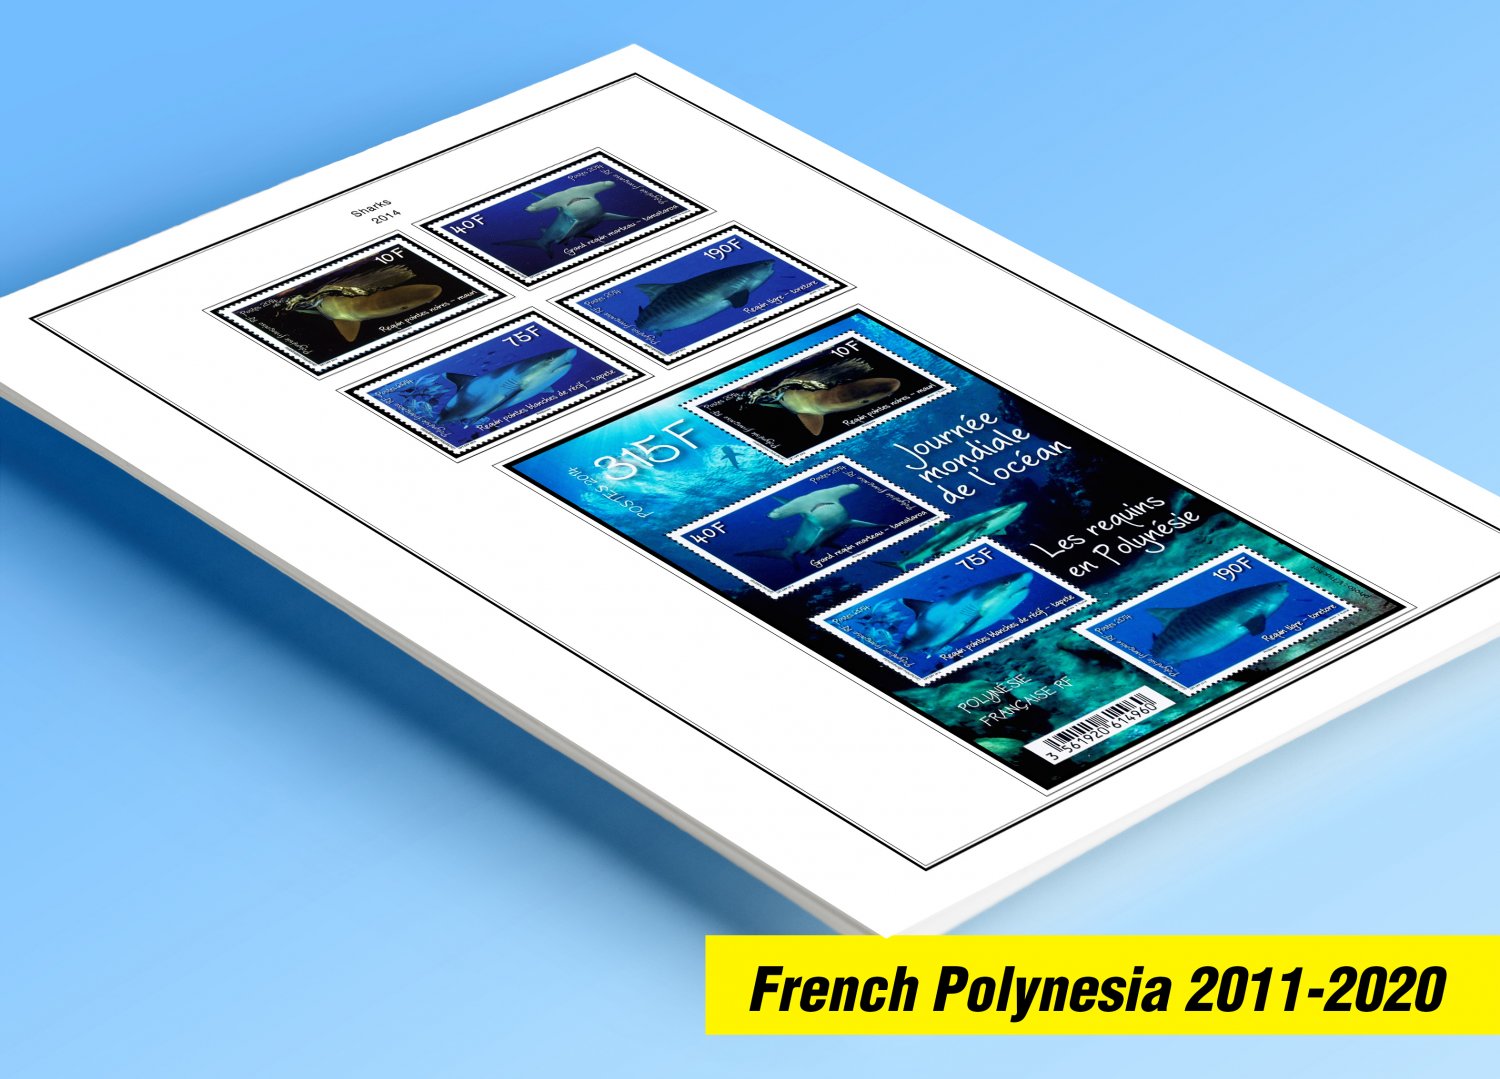 COLOR PRINTED FRENCH POLYNESIA 2011-2020 STAMP ALBUM PAGES (45 illustrated pages)